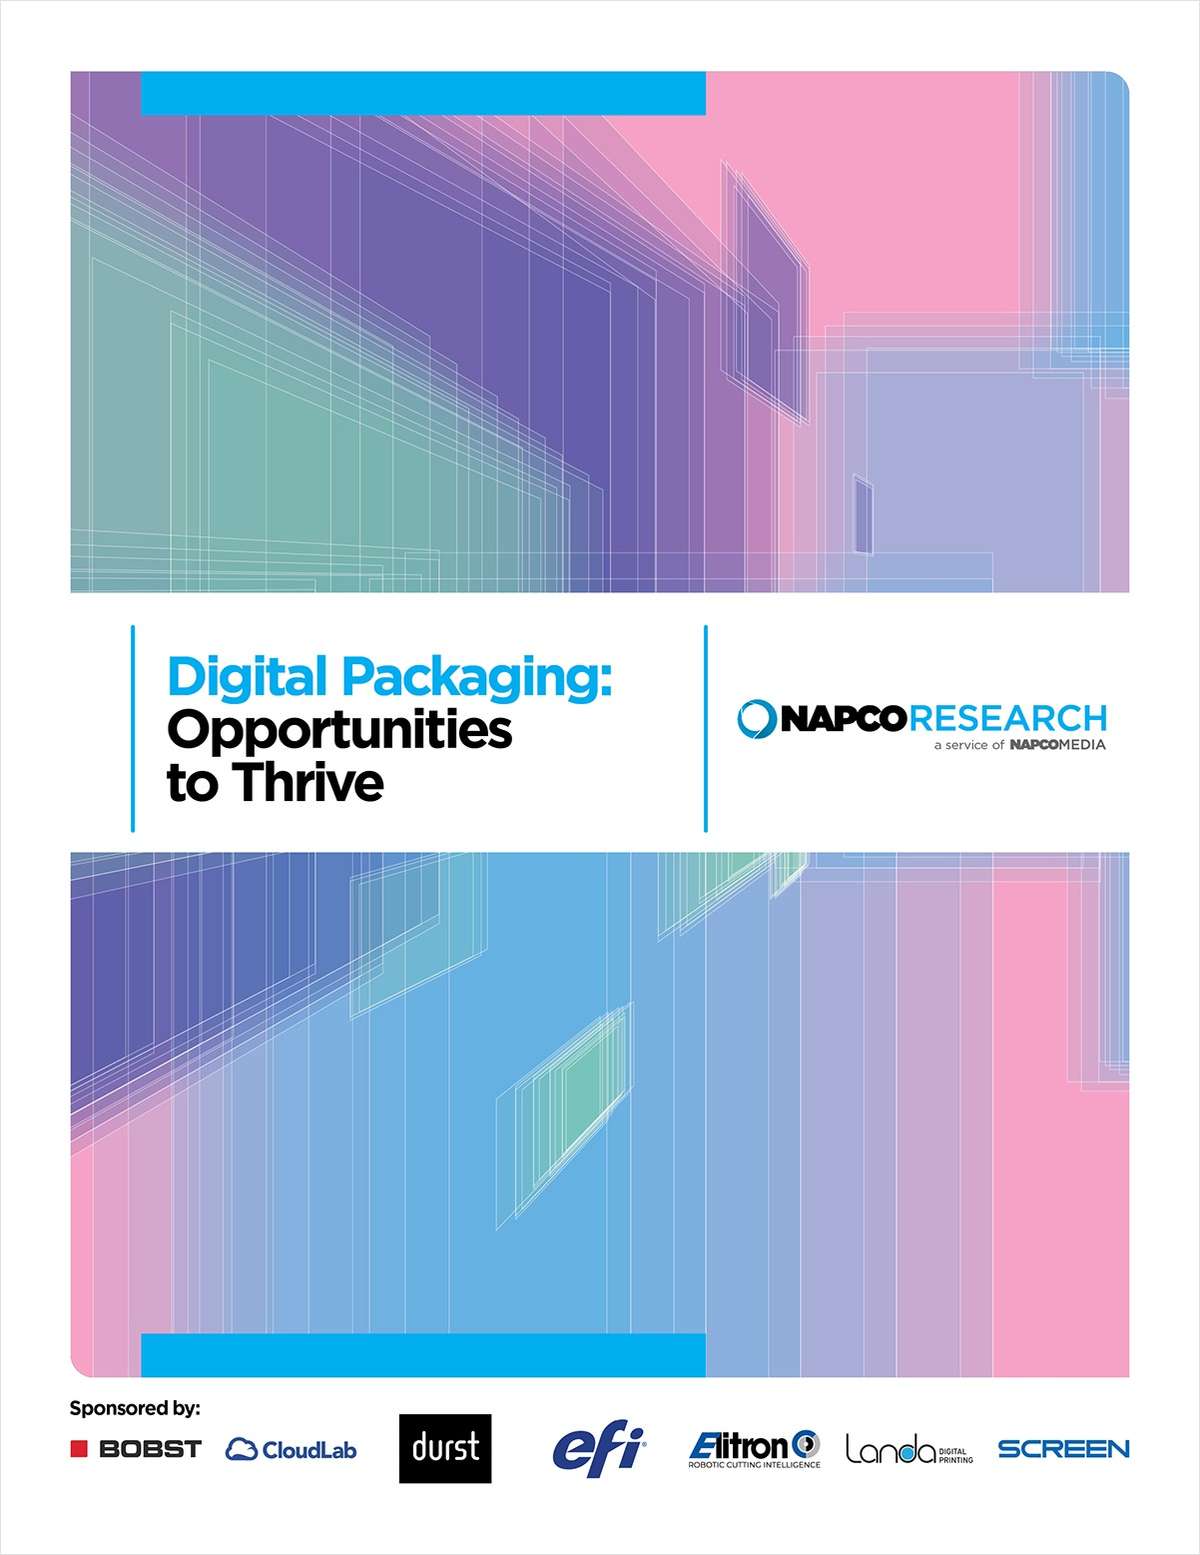 Digital Packaging: Opportunities to Thrive